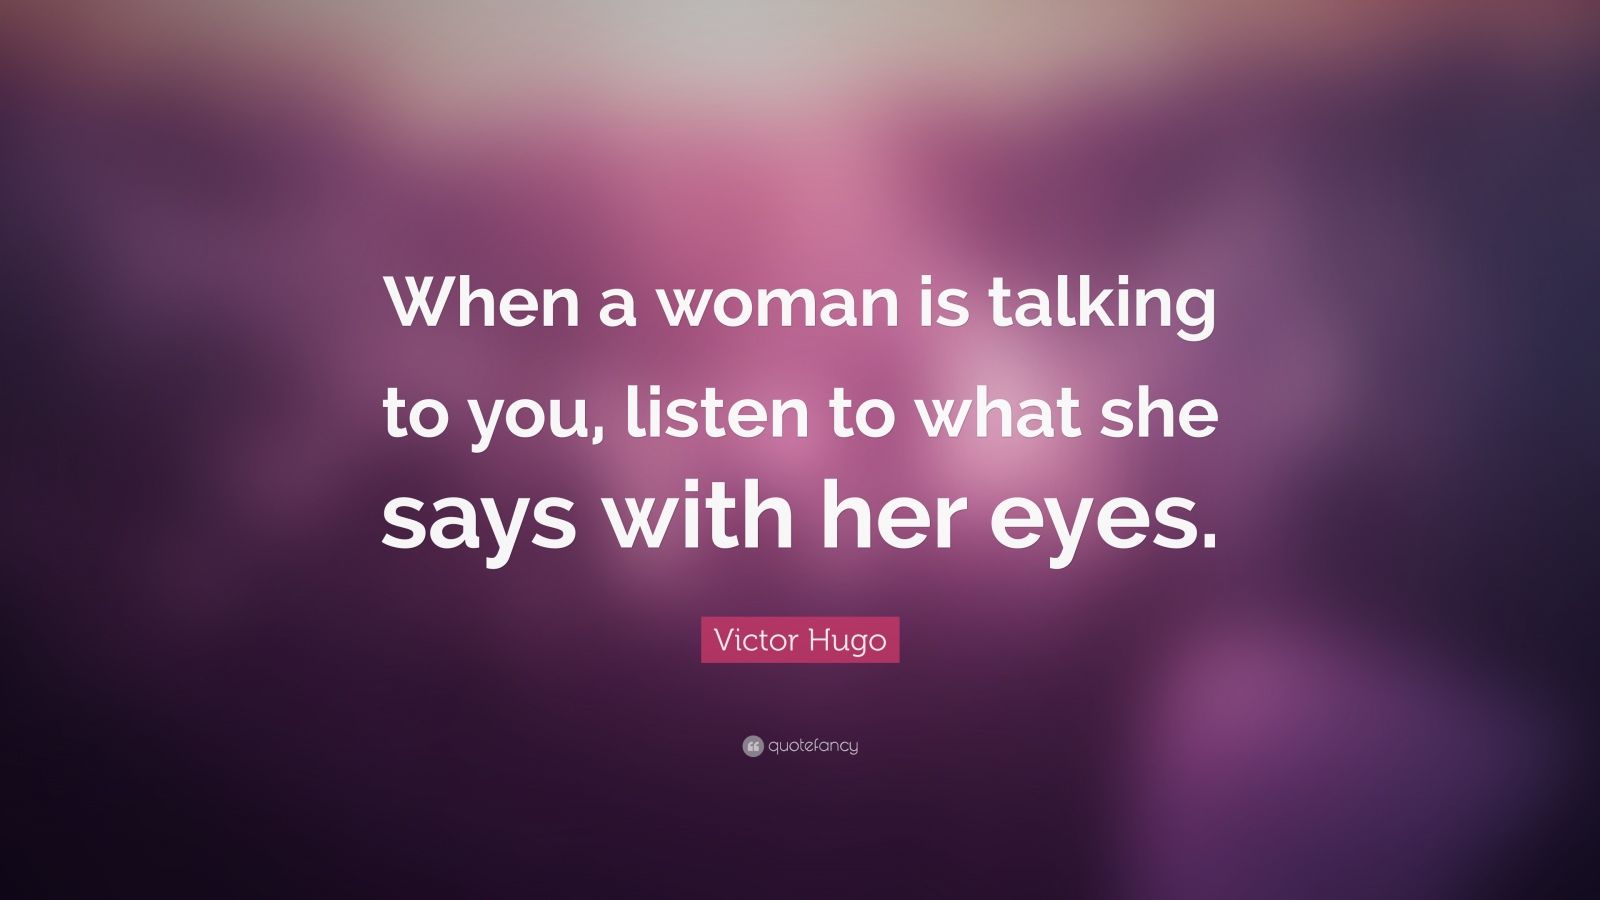 Victor Hugo Quote: “When a woman is talking to you, listen to what she ...